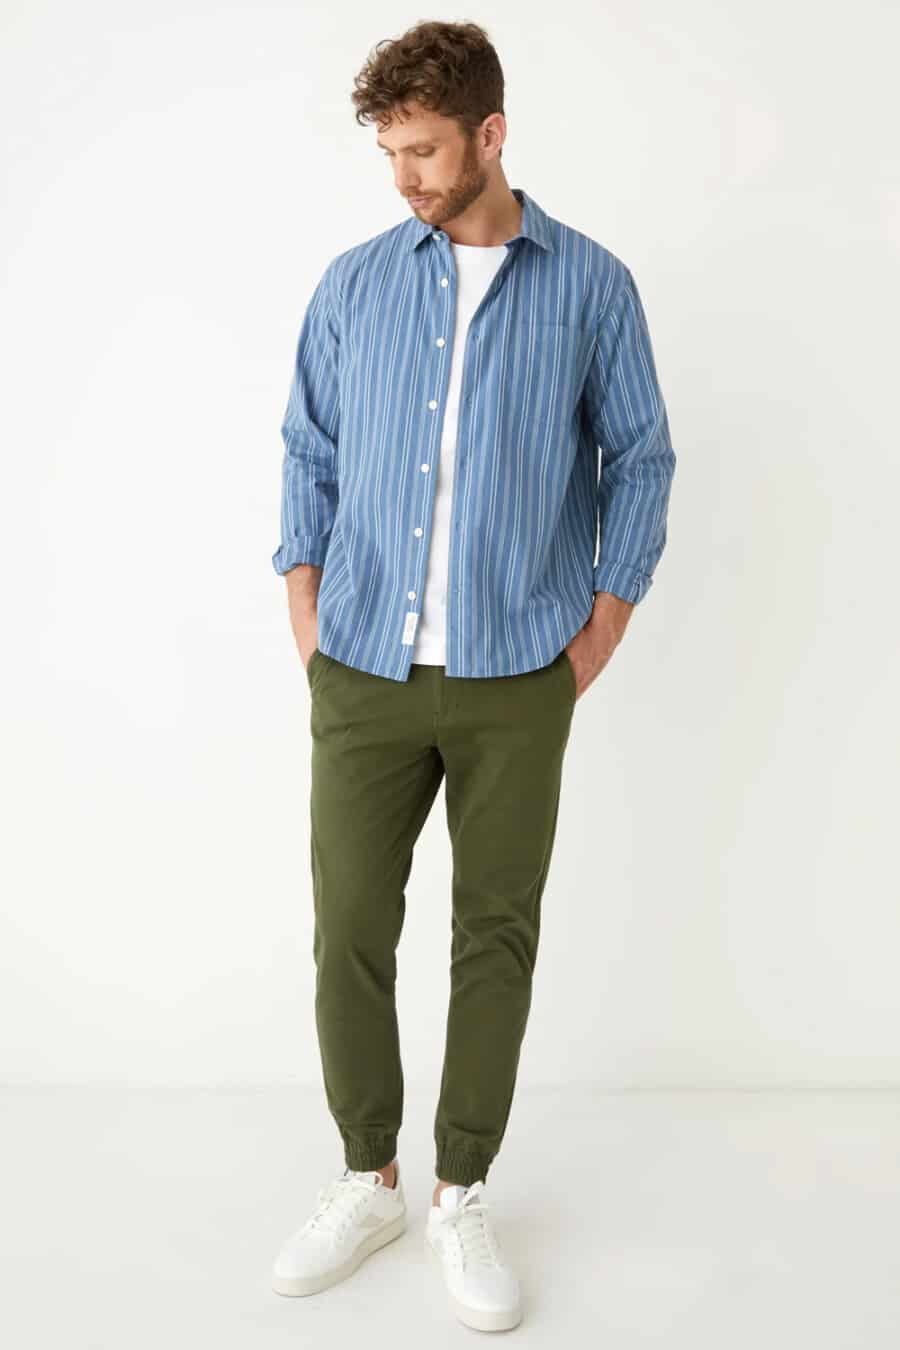 Men's green cuffed pants, white T-shirt, open mid blue striped shirt and white leather sneakers outfit